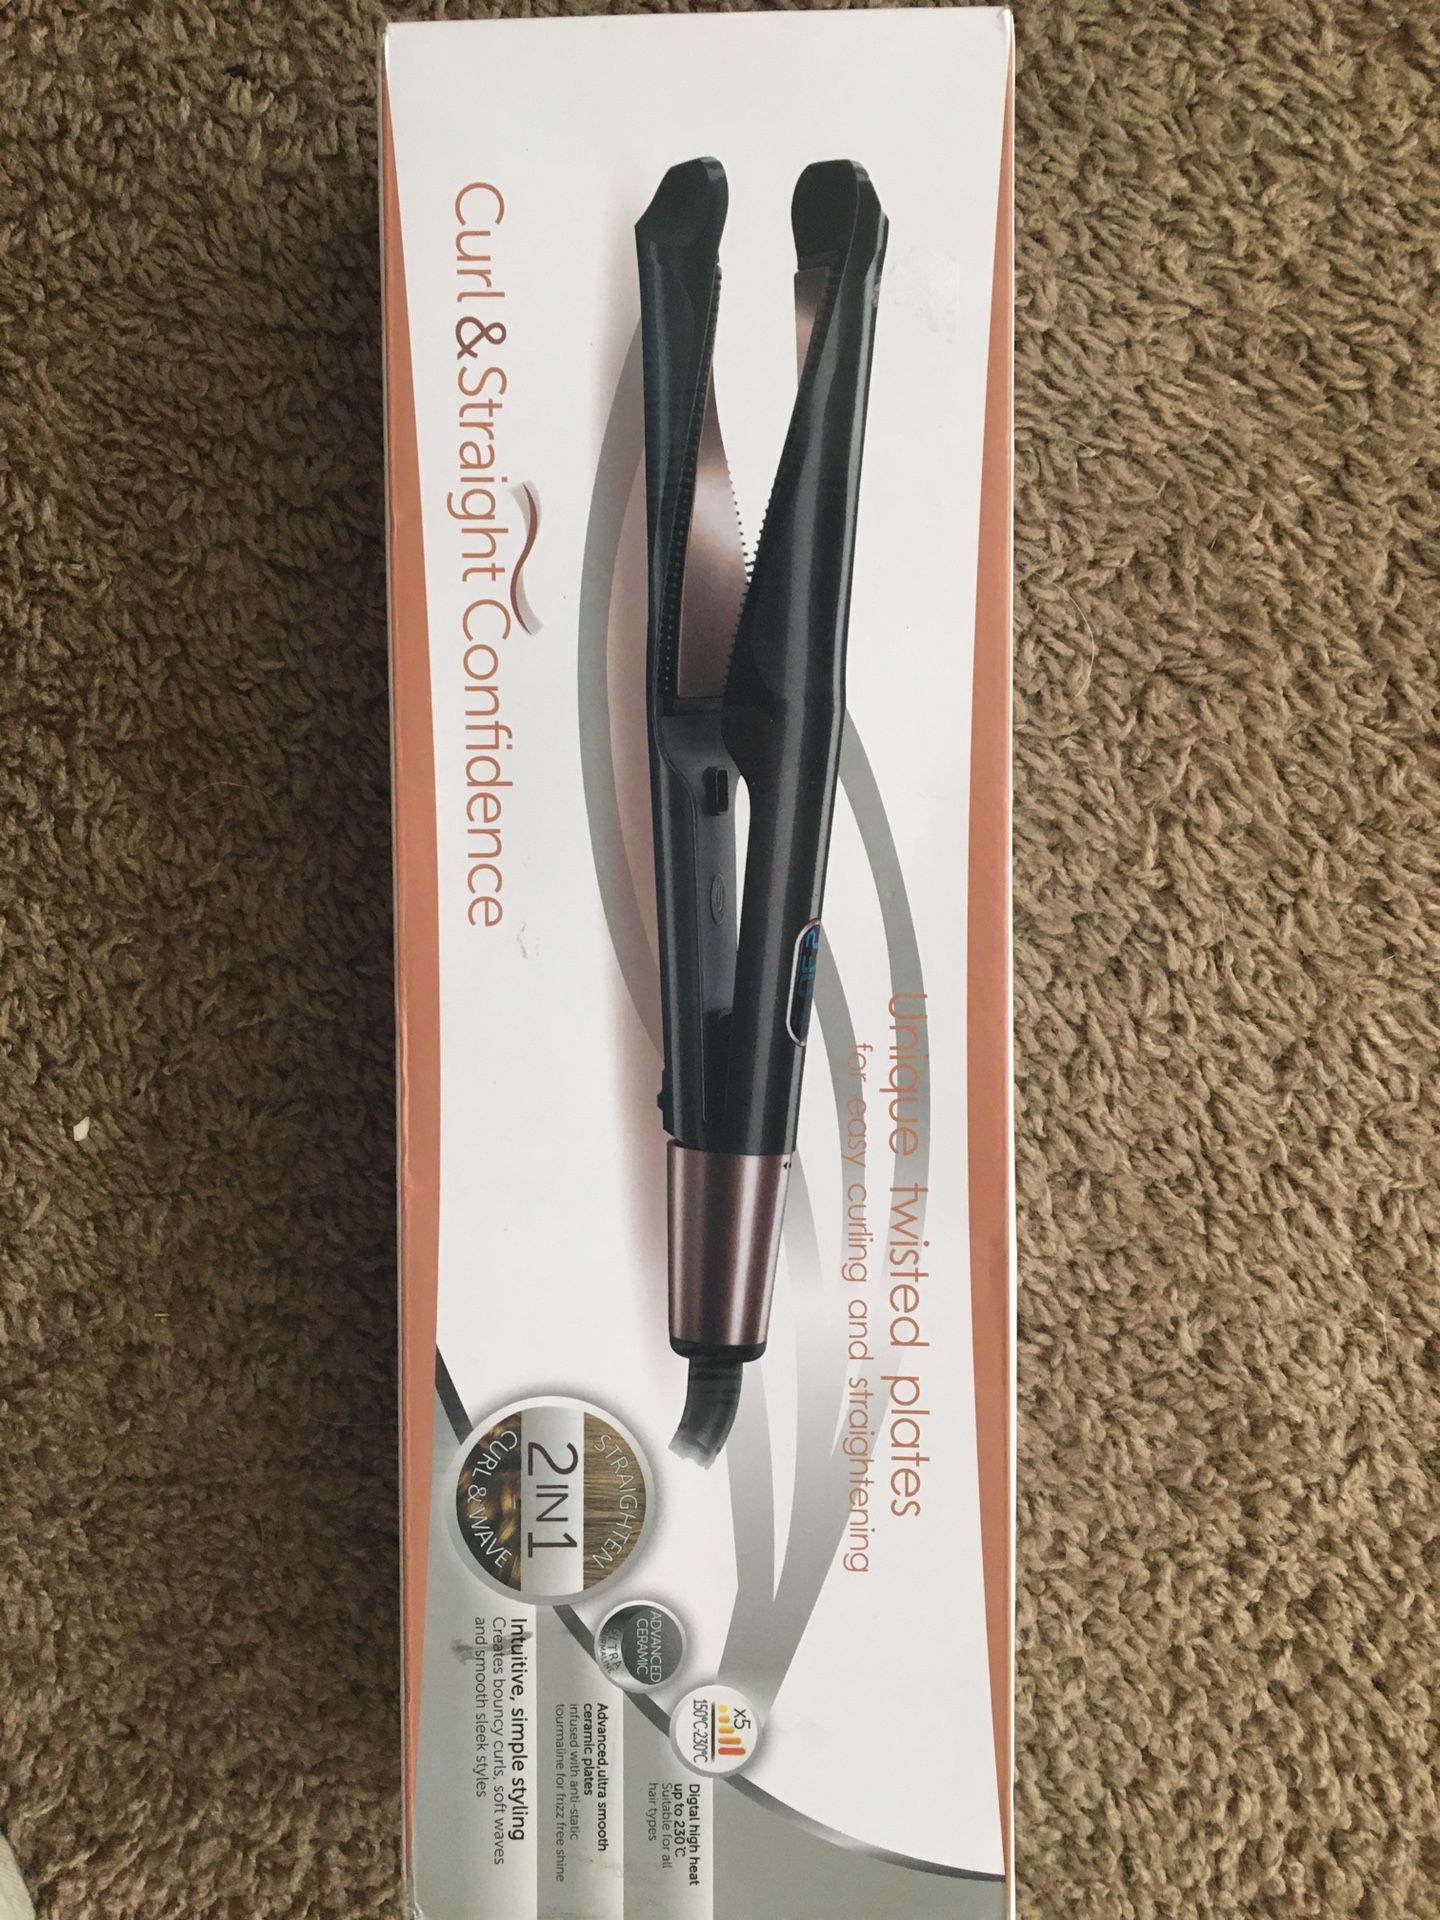 2 in 1 curler and straightener